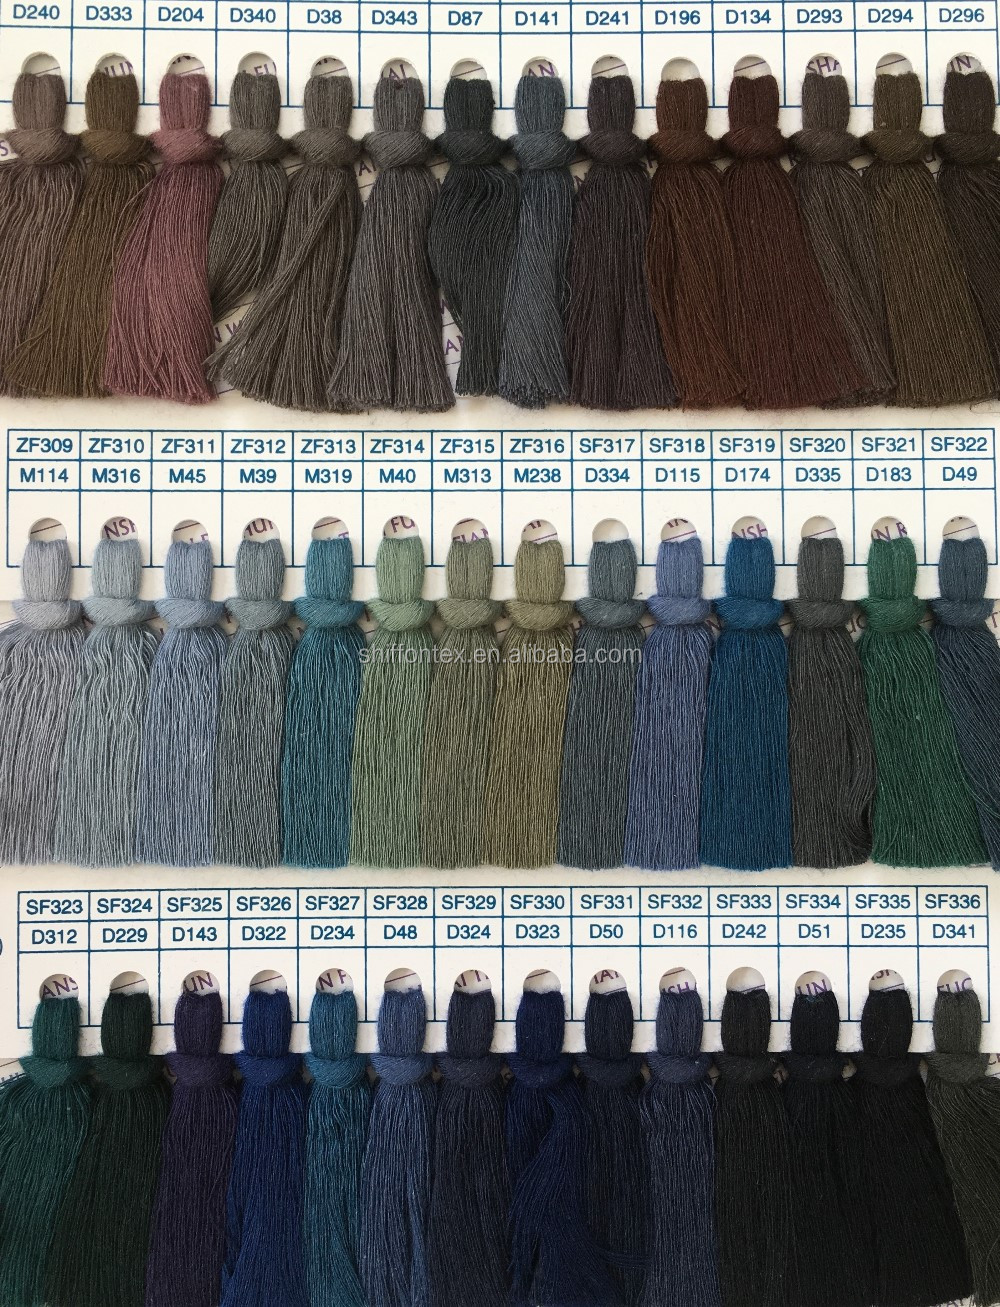 Color Dyed Cotton Yarns